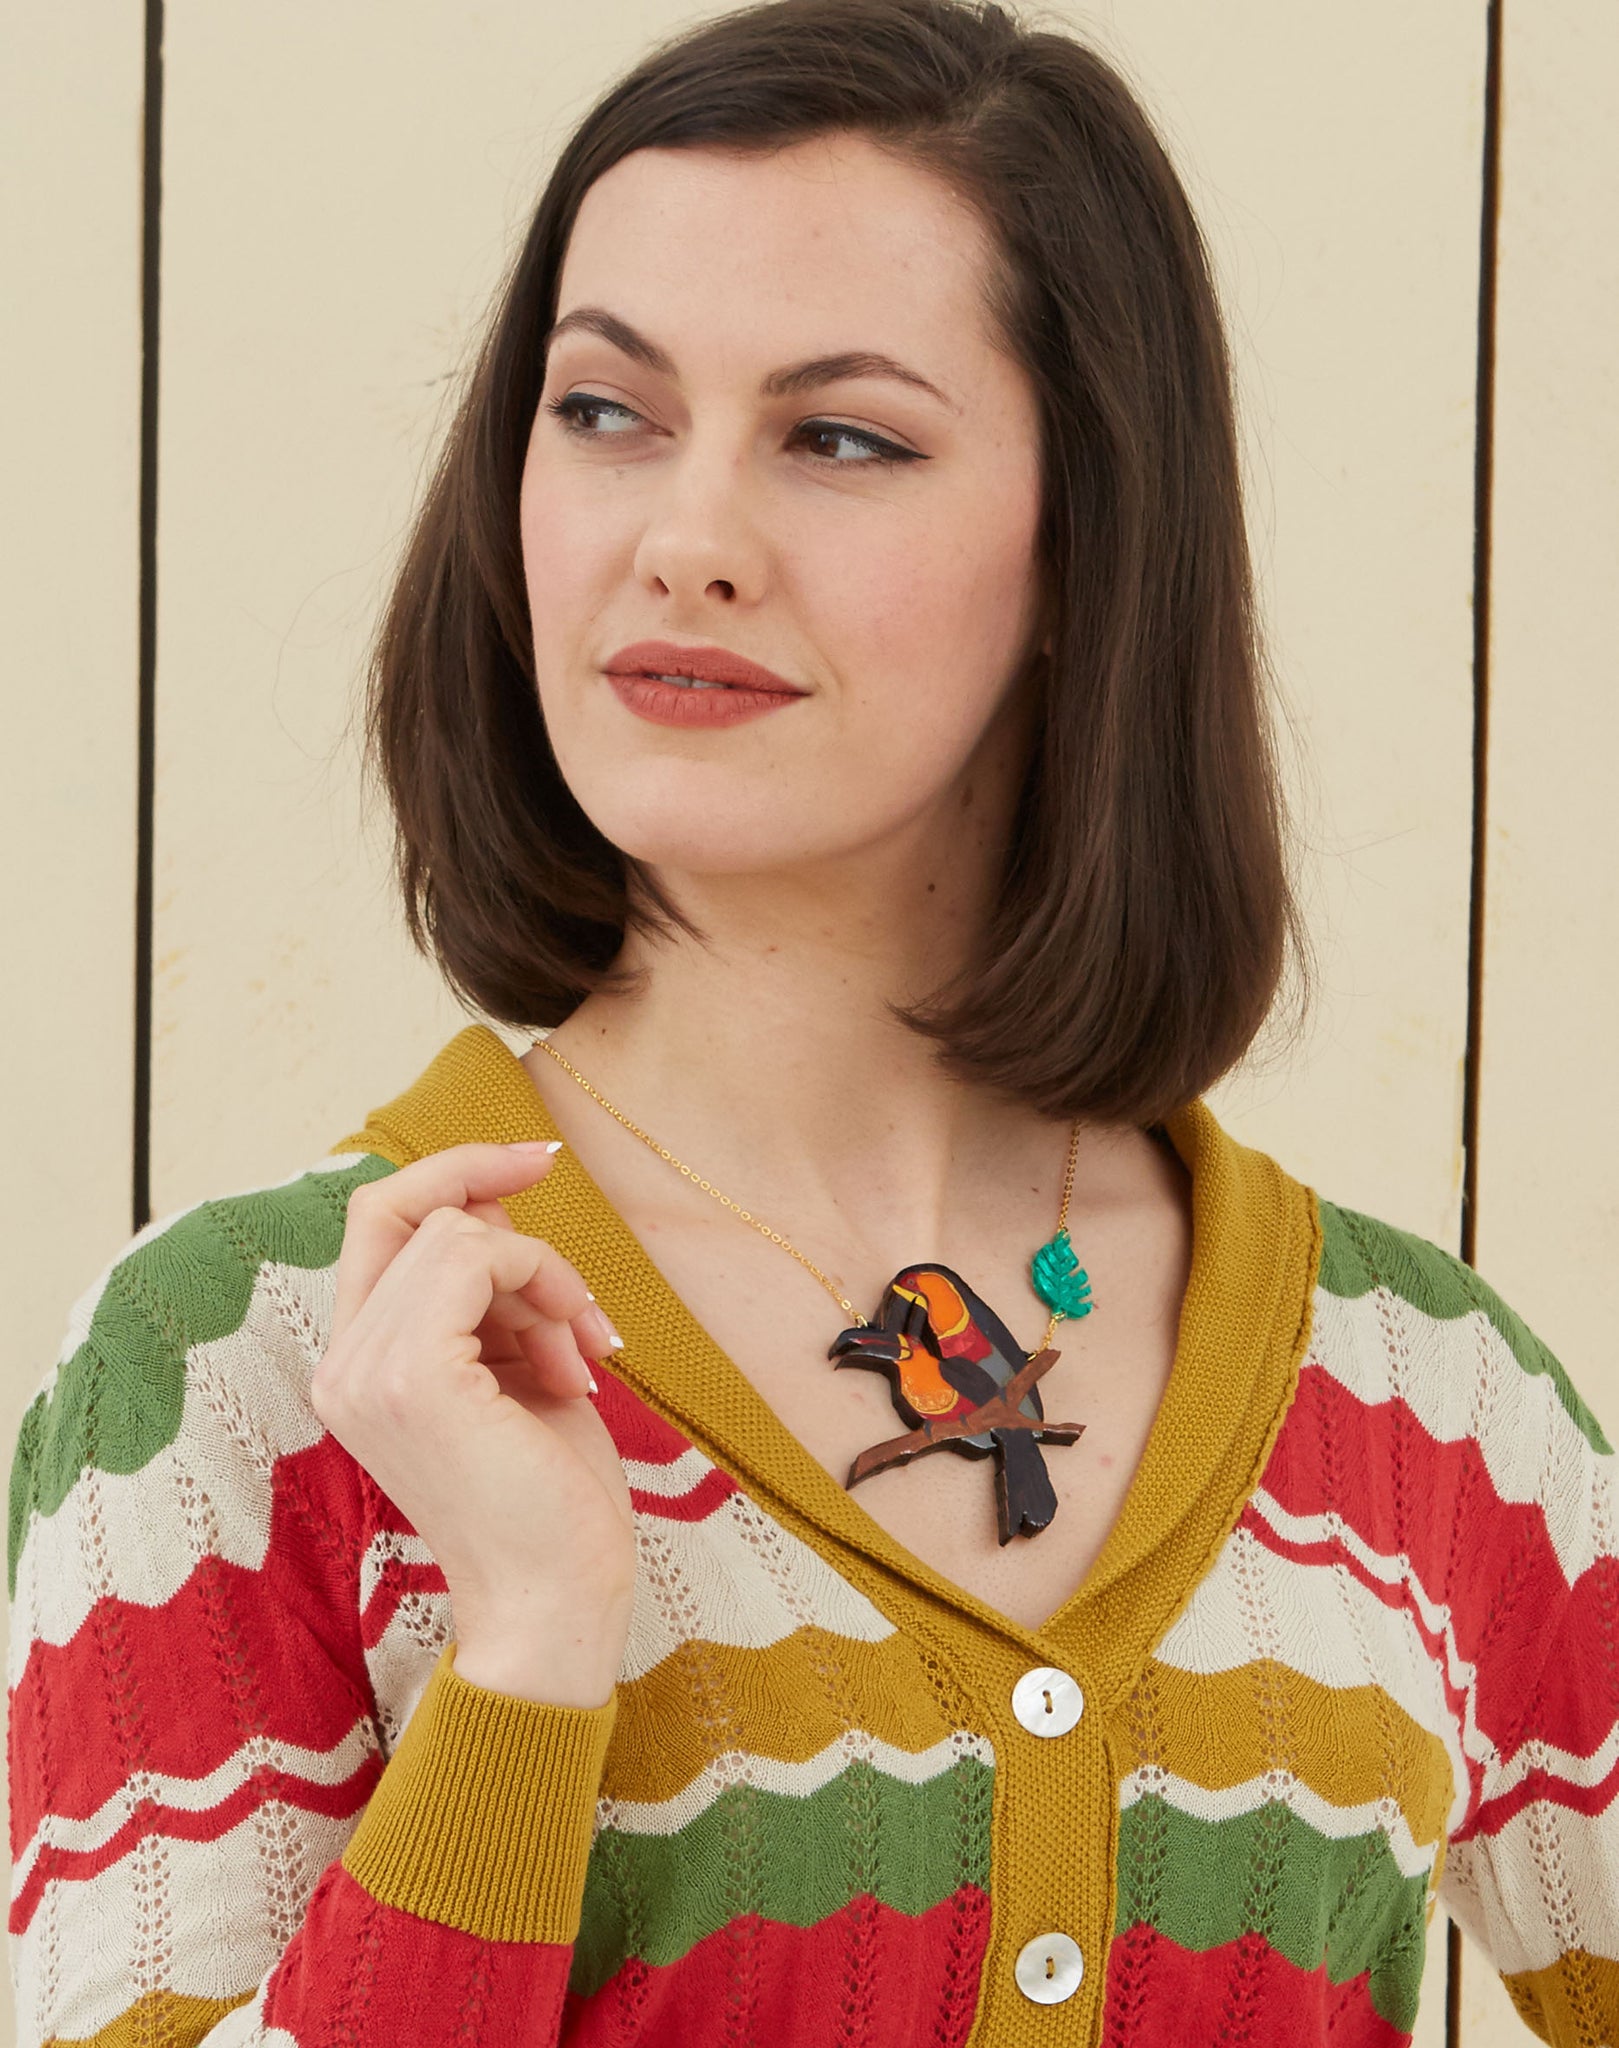 Toucan Laser-cut Acrylic Hand-painted British-made Retro Necklace